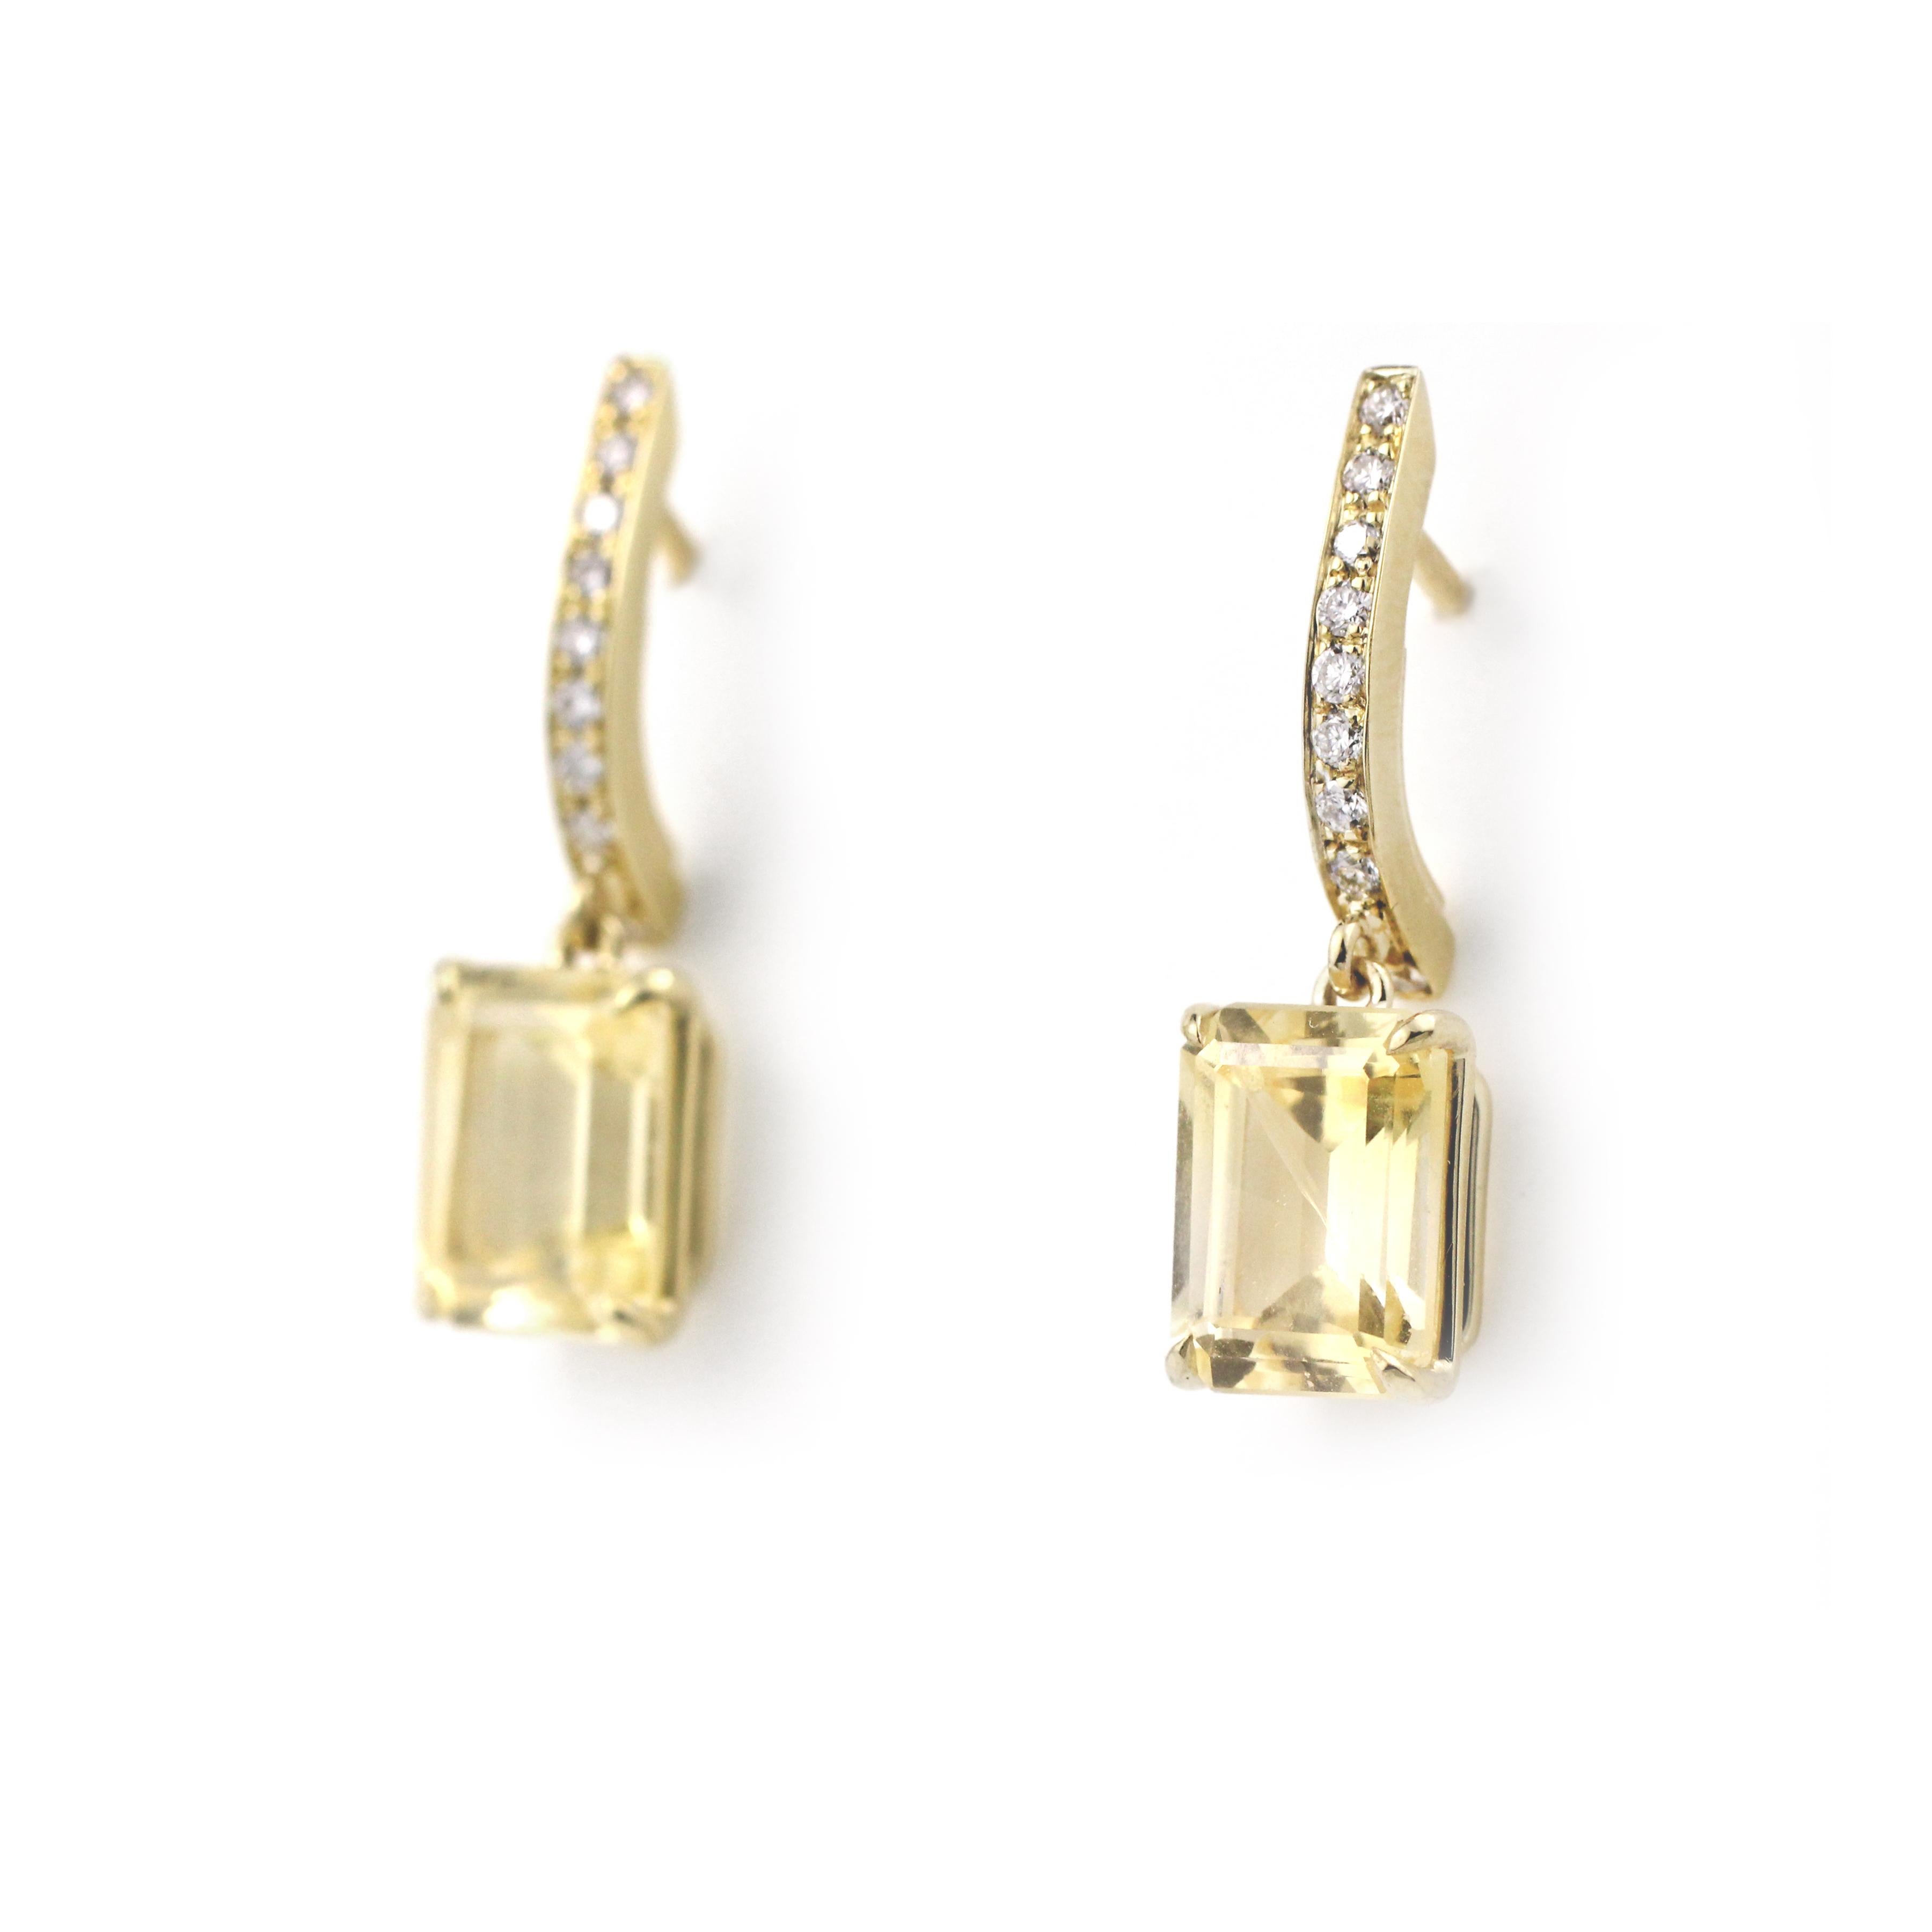 These summer beauties contain two emerald-cut Yellow Sapphire Drops (4.83 Cts.) on 18 Kt Gold & Diamond pave tops. They have a soft pale yellow color that looks great on the ear.

Designed and made in-house by Julius Cohen New York.